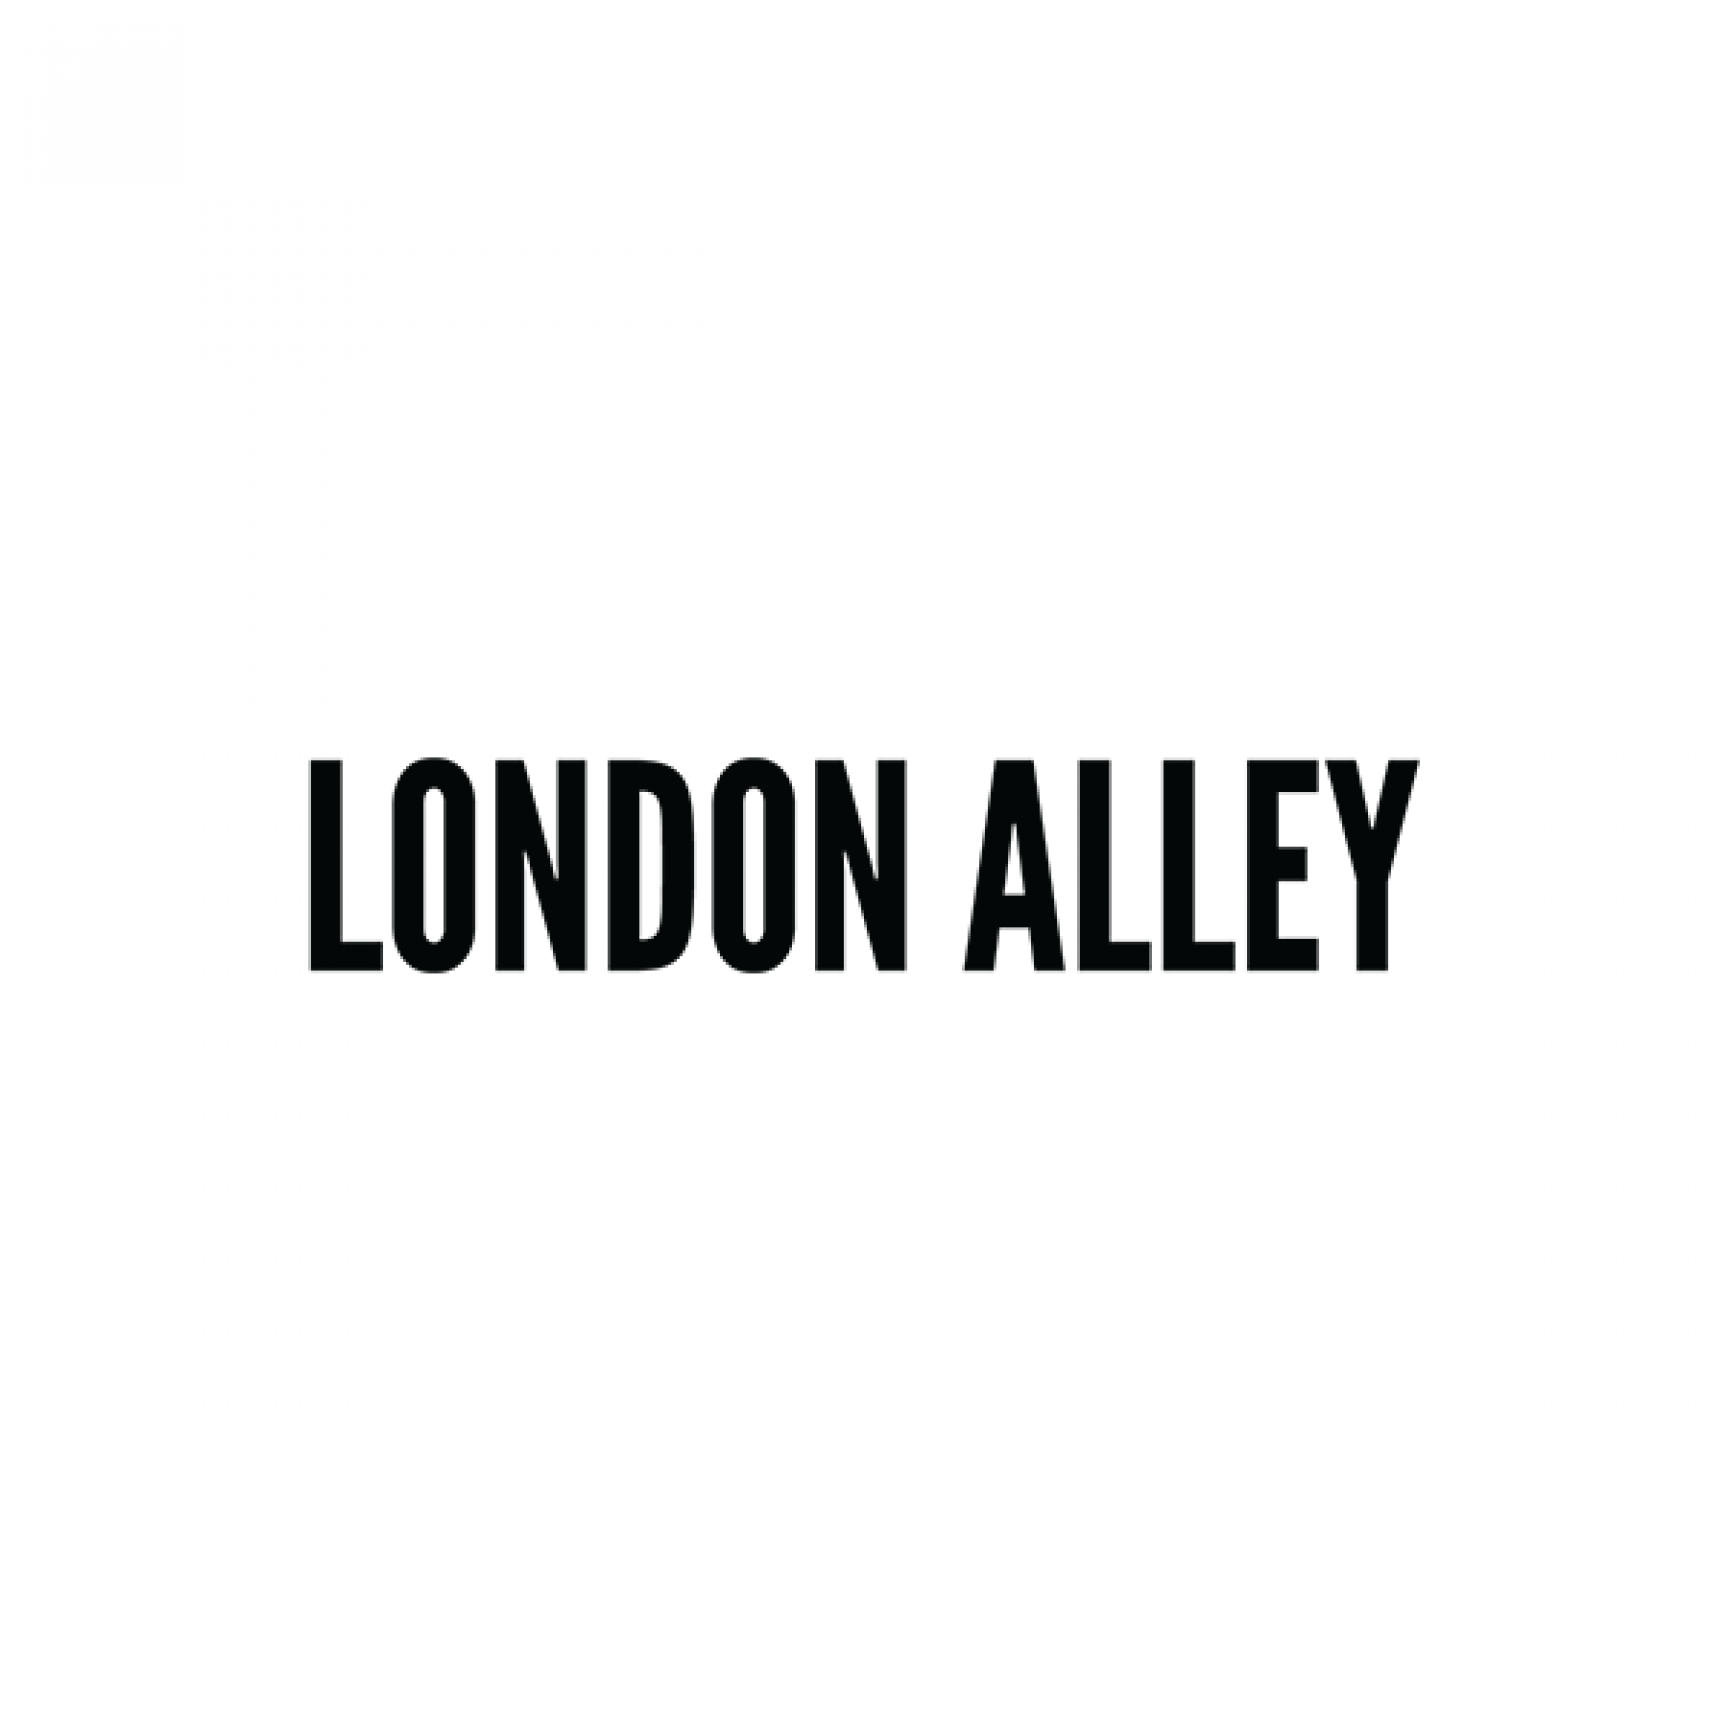 London Alley | Commercial Film & Stills Production Company ...